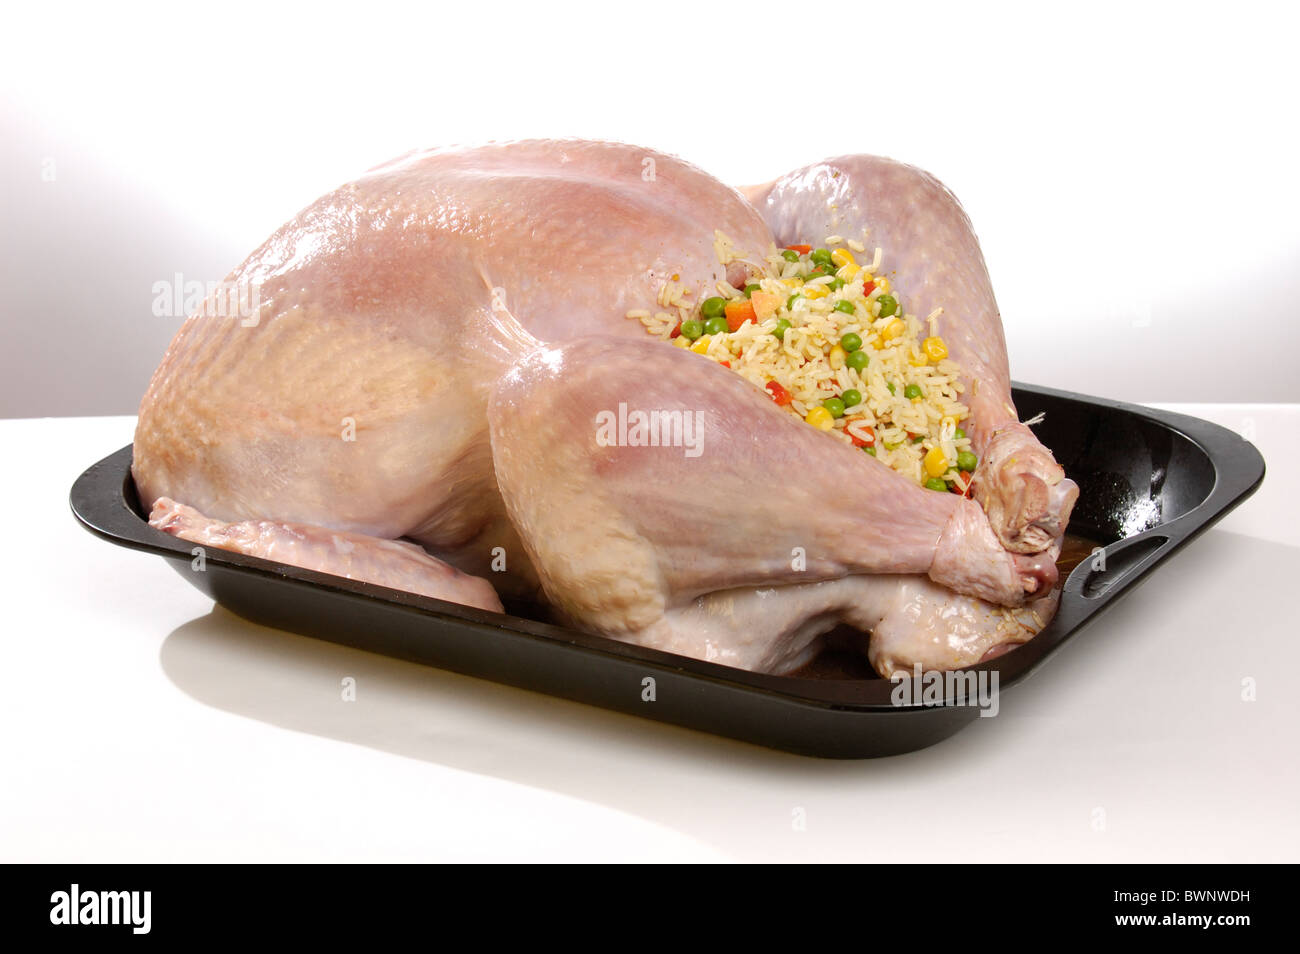 https://c8.alamy.com/comp/BWNWDH/prepared-for-cooking-stuffed-turkey-in-a-baking-tray-isolated-on-white-BWNWDH.jpg